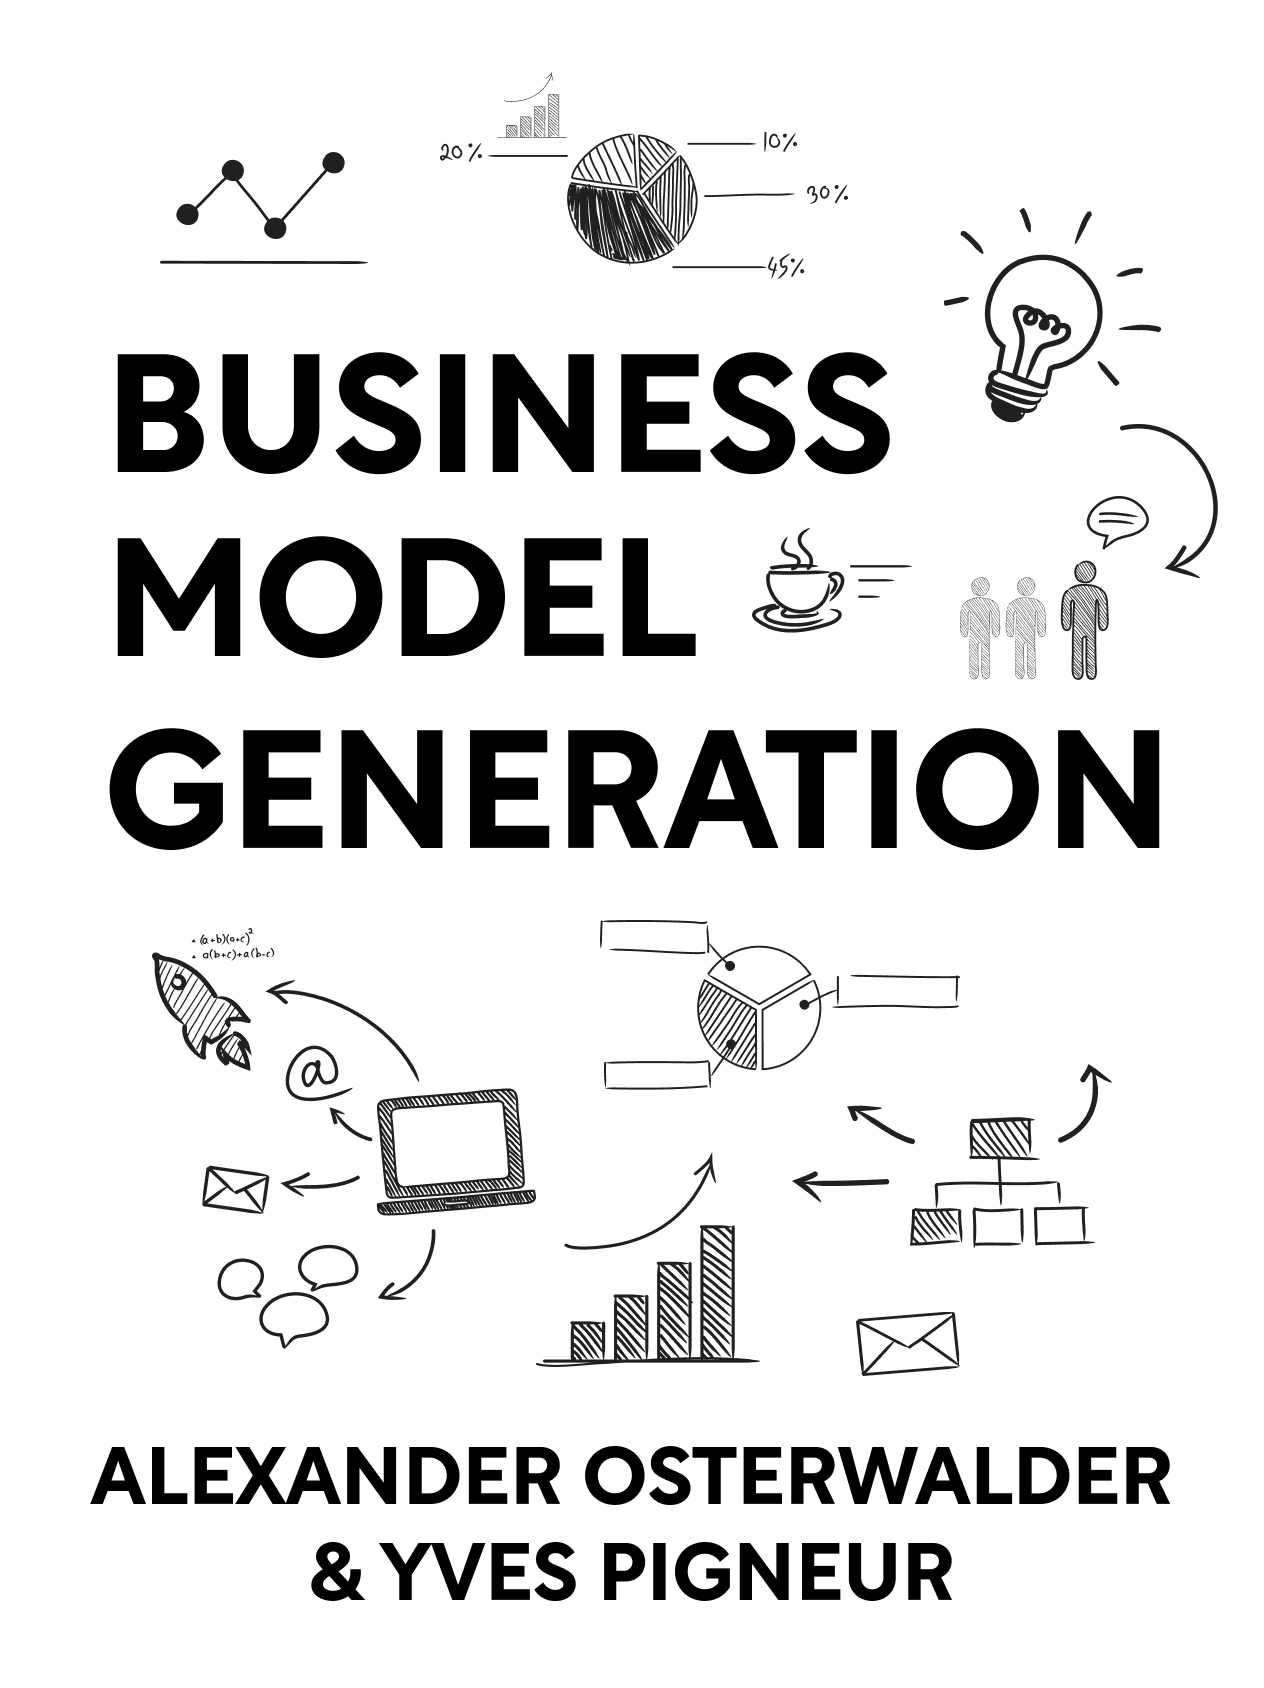 Revolutionize Your Business with “Business Model Generation”